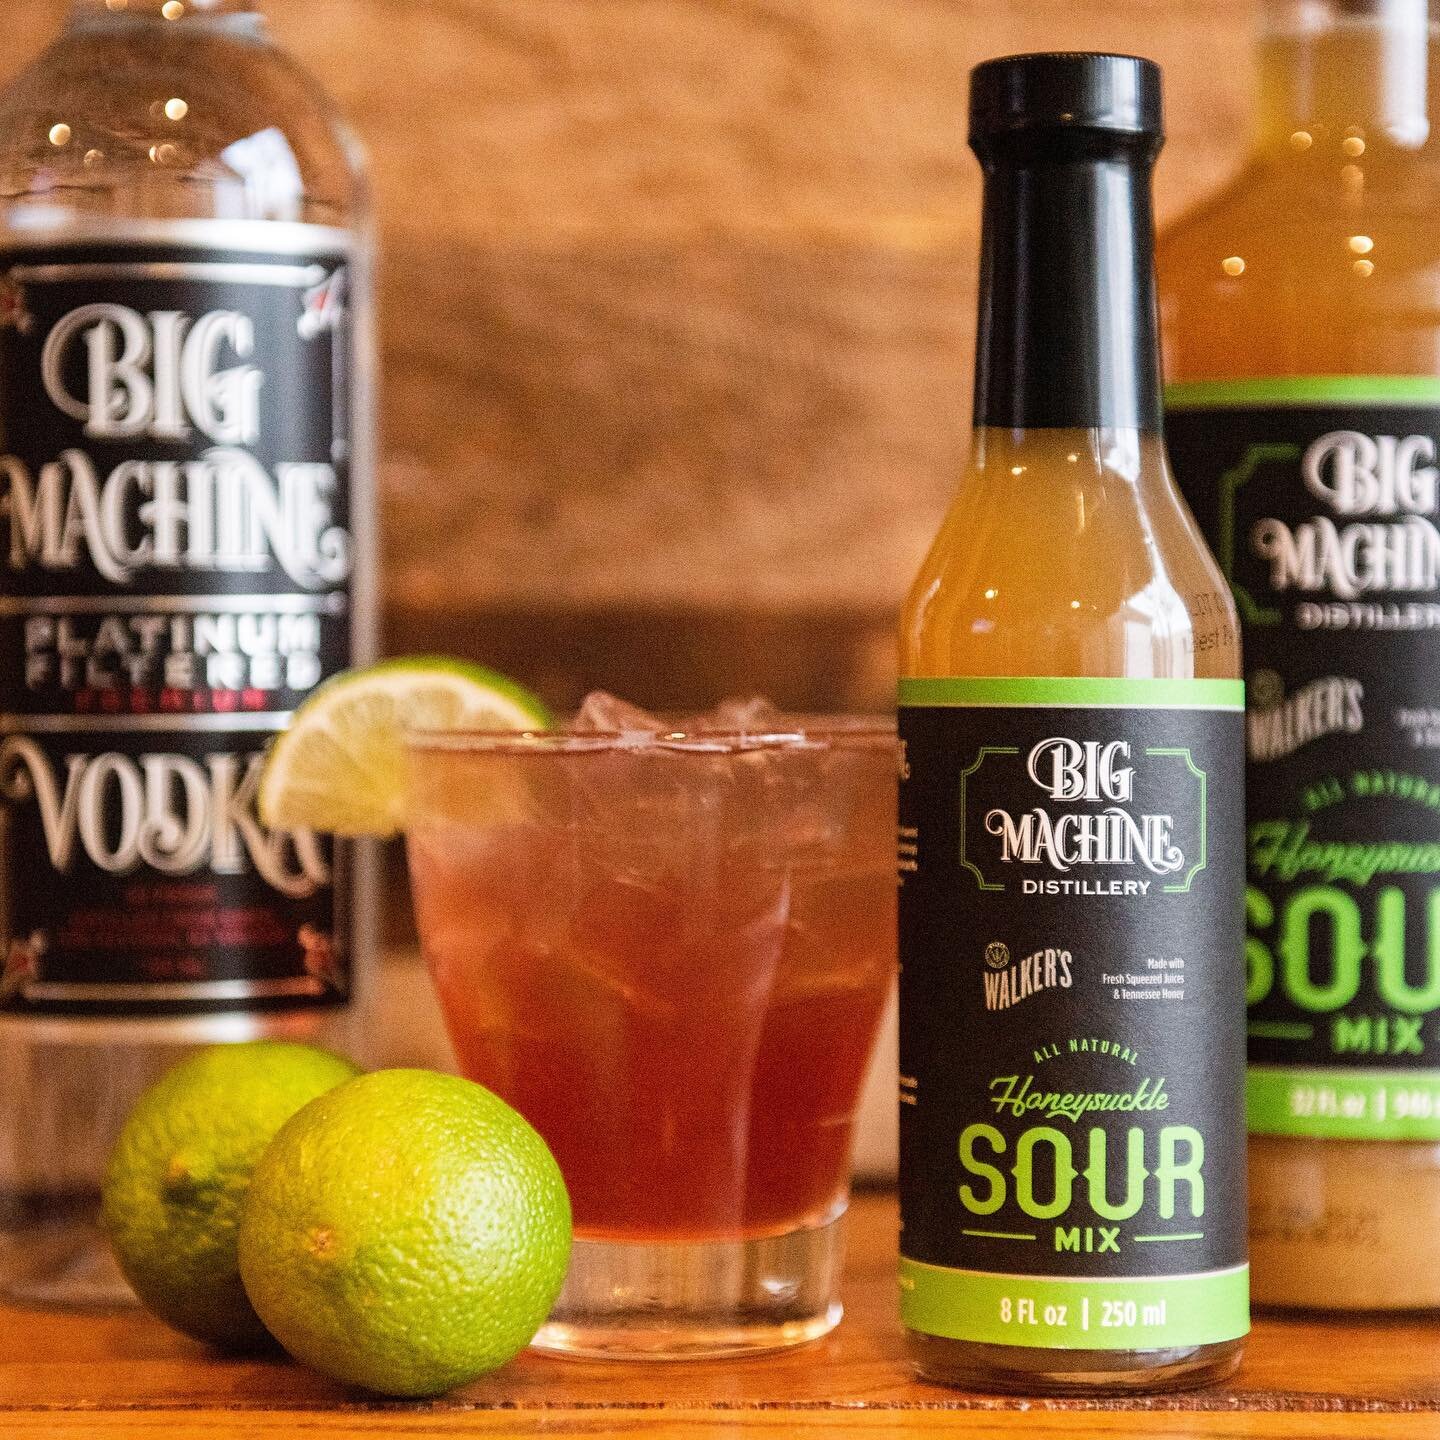 What&rsquo;s the best mixer for a Big Machine Distillery spirit? There&rsquo;s no better answer than Big Machine Distillery sour mix. Stop by this week to pick up a bottle to take home!